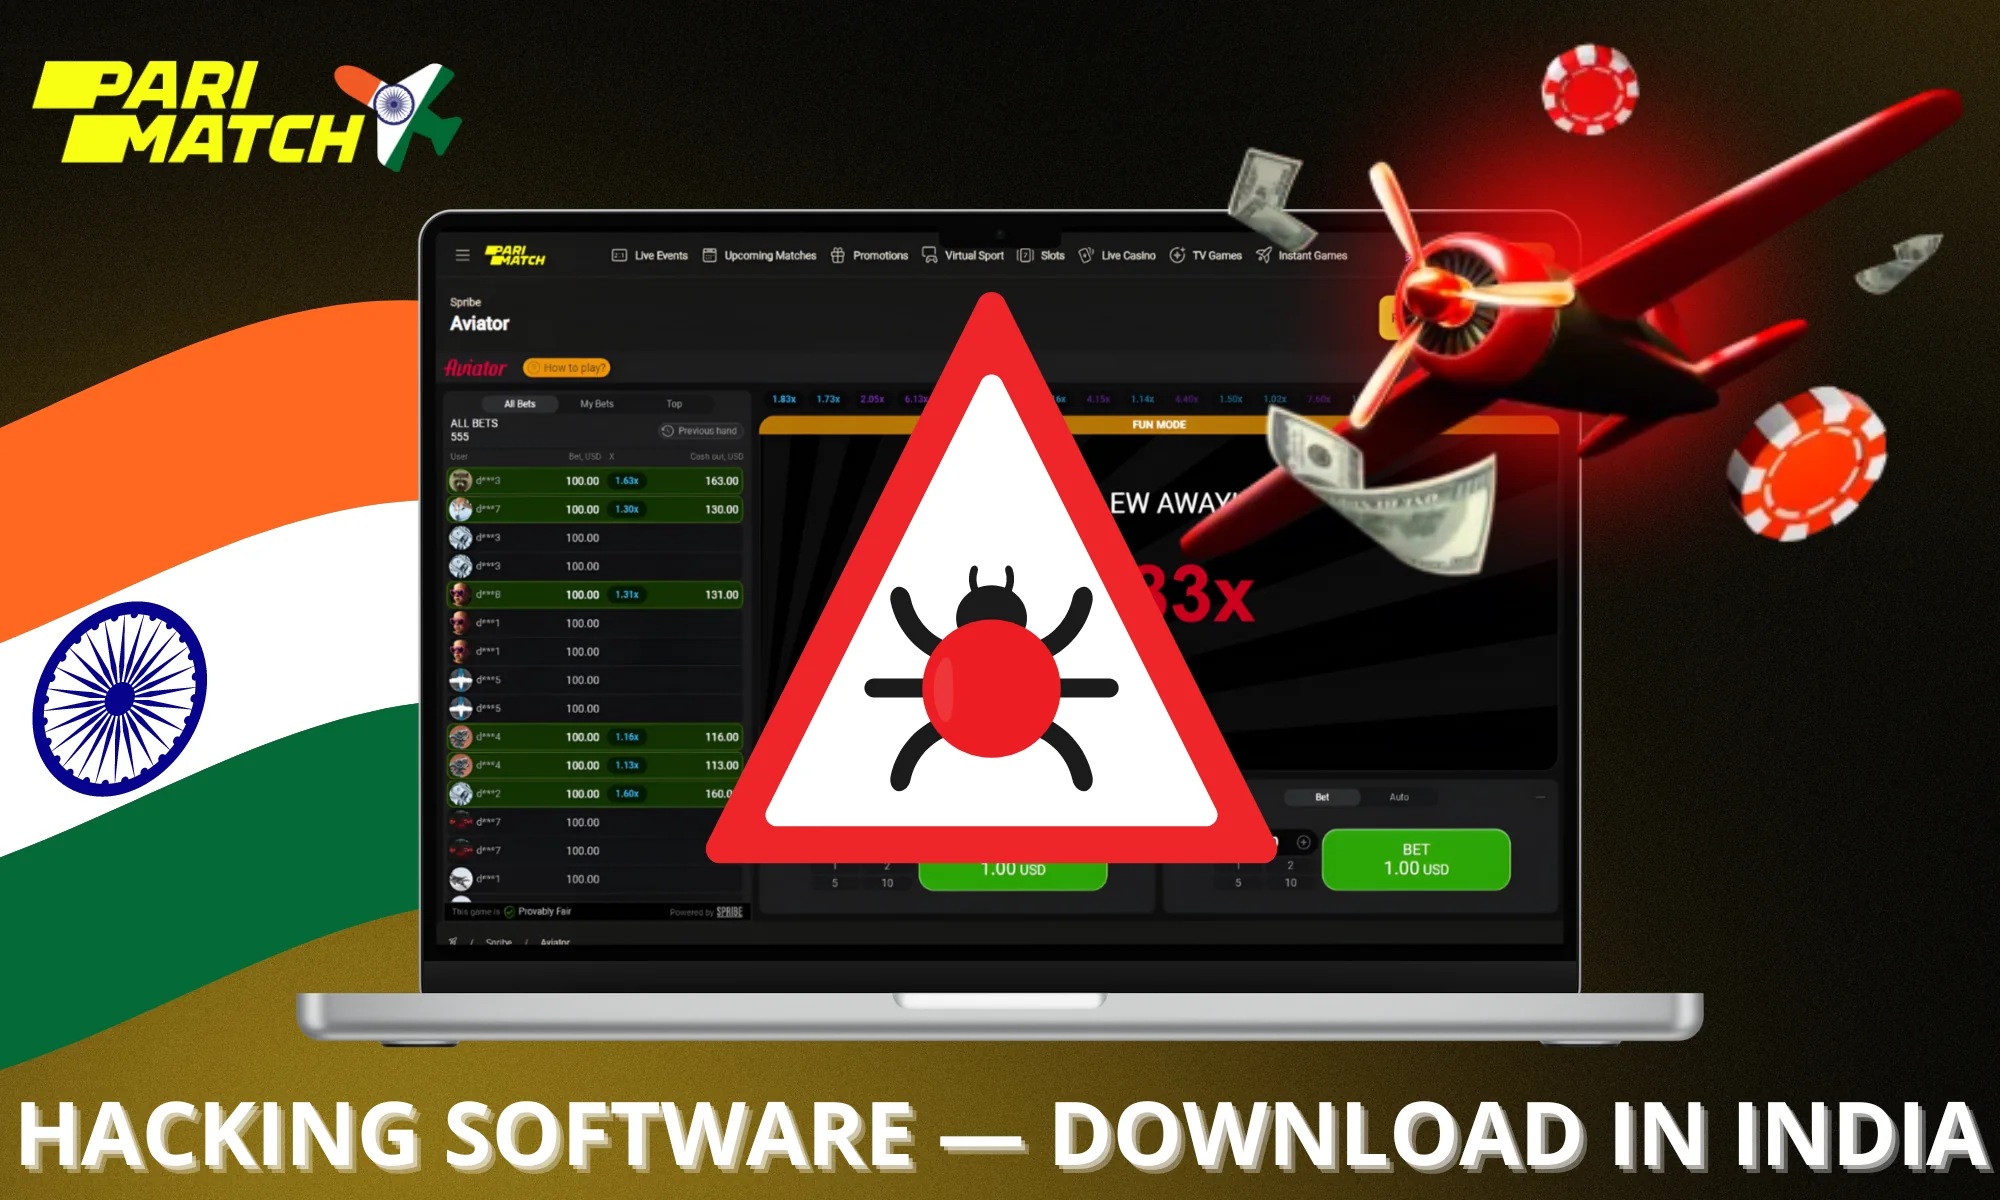 How to download Parimatch Aviator Hacking Software